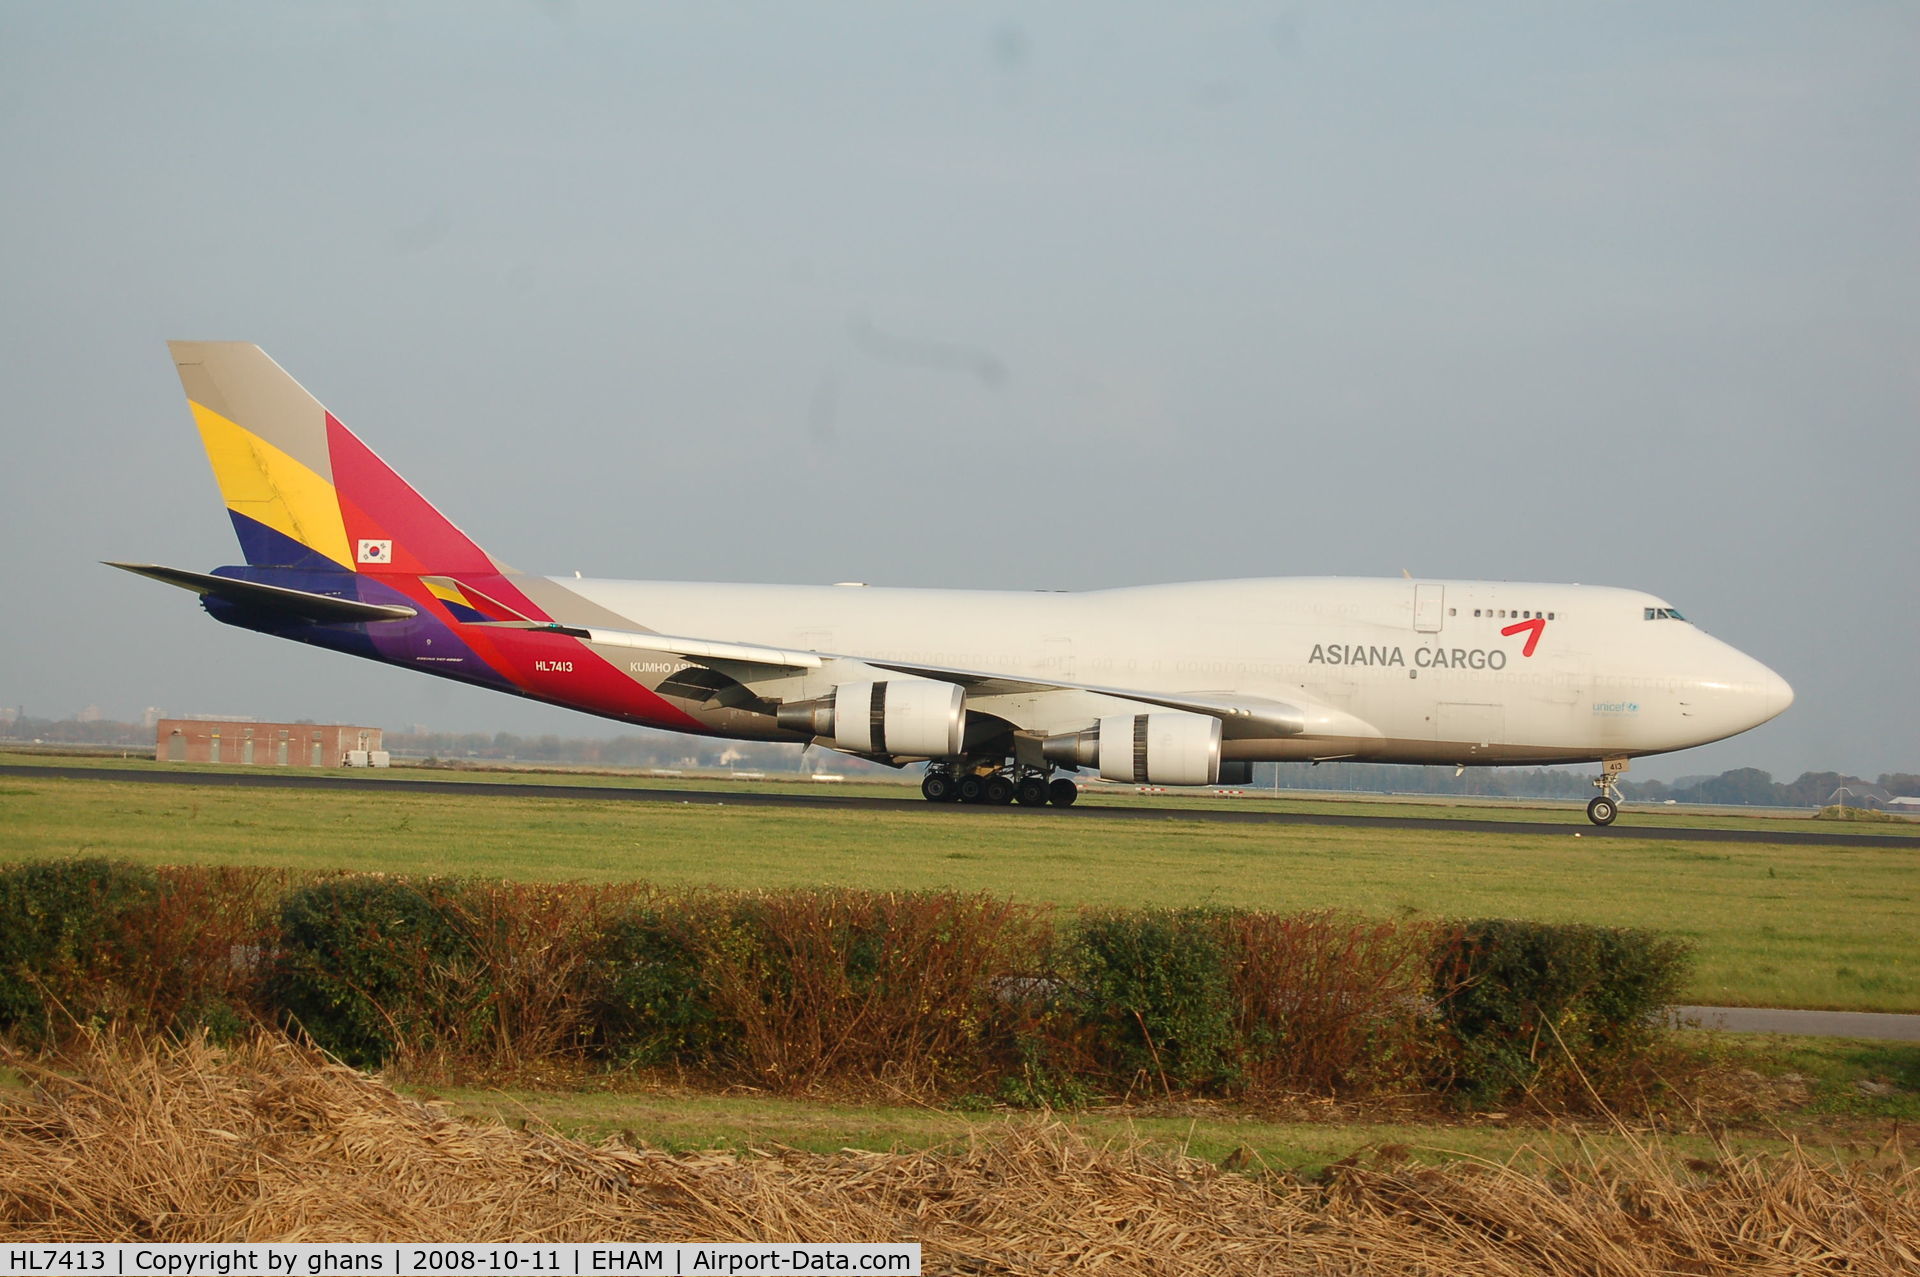 HL7413, 1991 Boeing 747-48ESF C/N 25405, New colors for Asiana